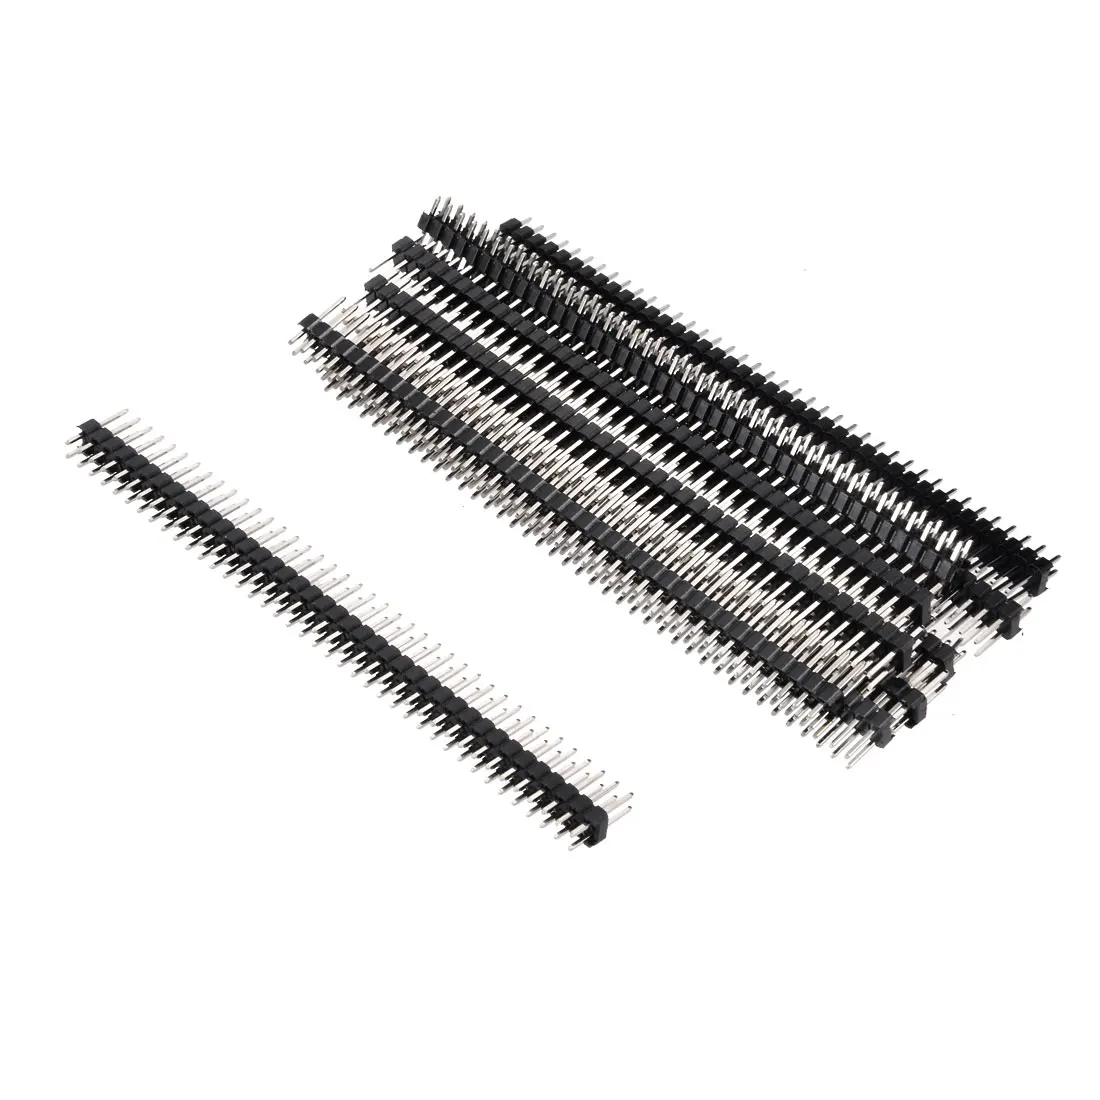 

uxcell 10Pcs 2.54mm Pitch 40-Pin 11mm Length Double Row Straight Connector Pin Header Strip for Arduino Prototype Shield